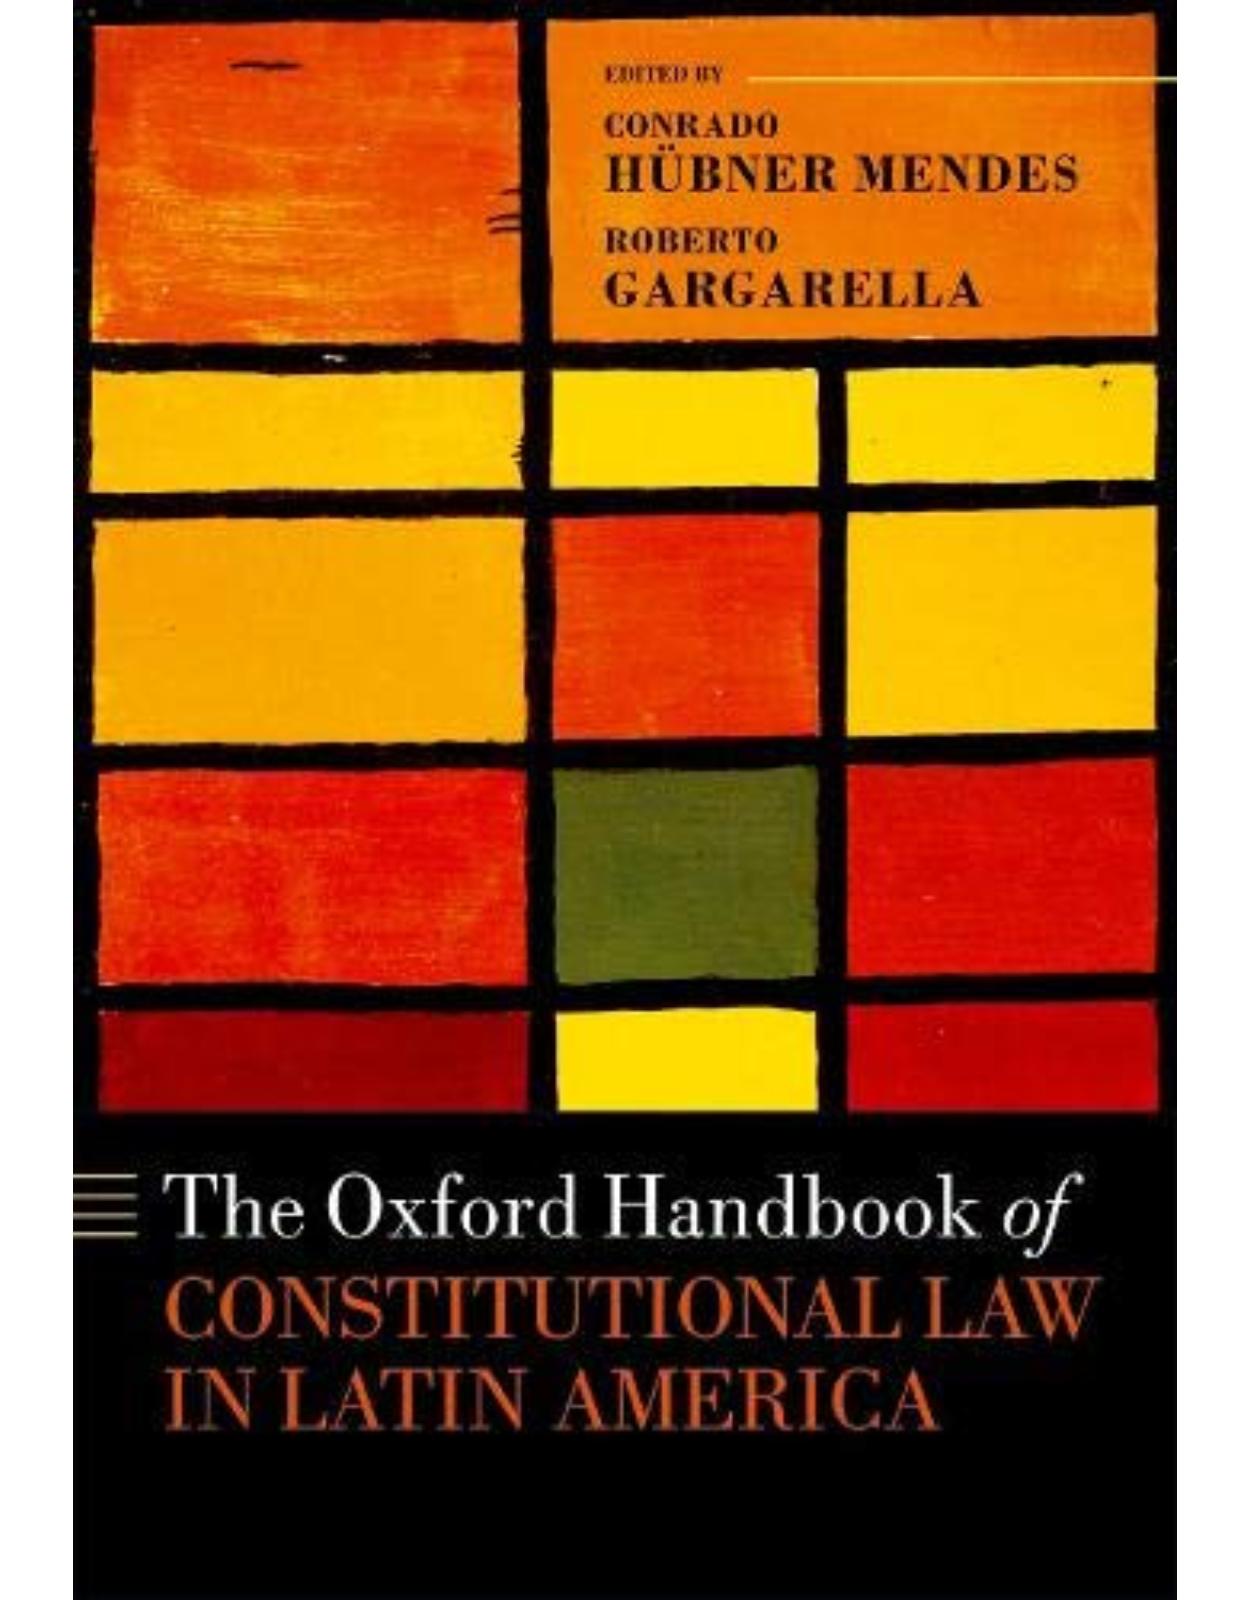 The Oxford Handbook of Constitutional Law in Latin America